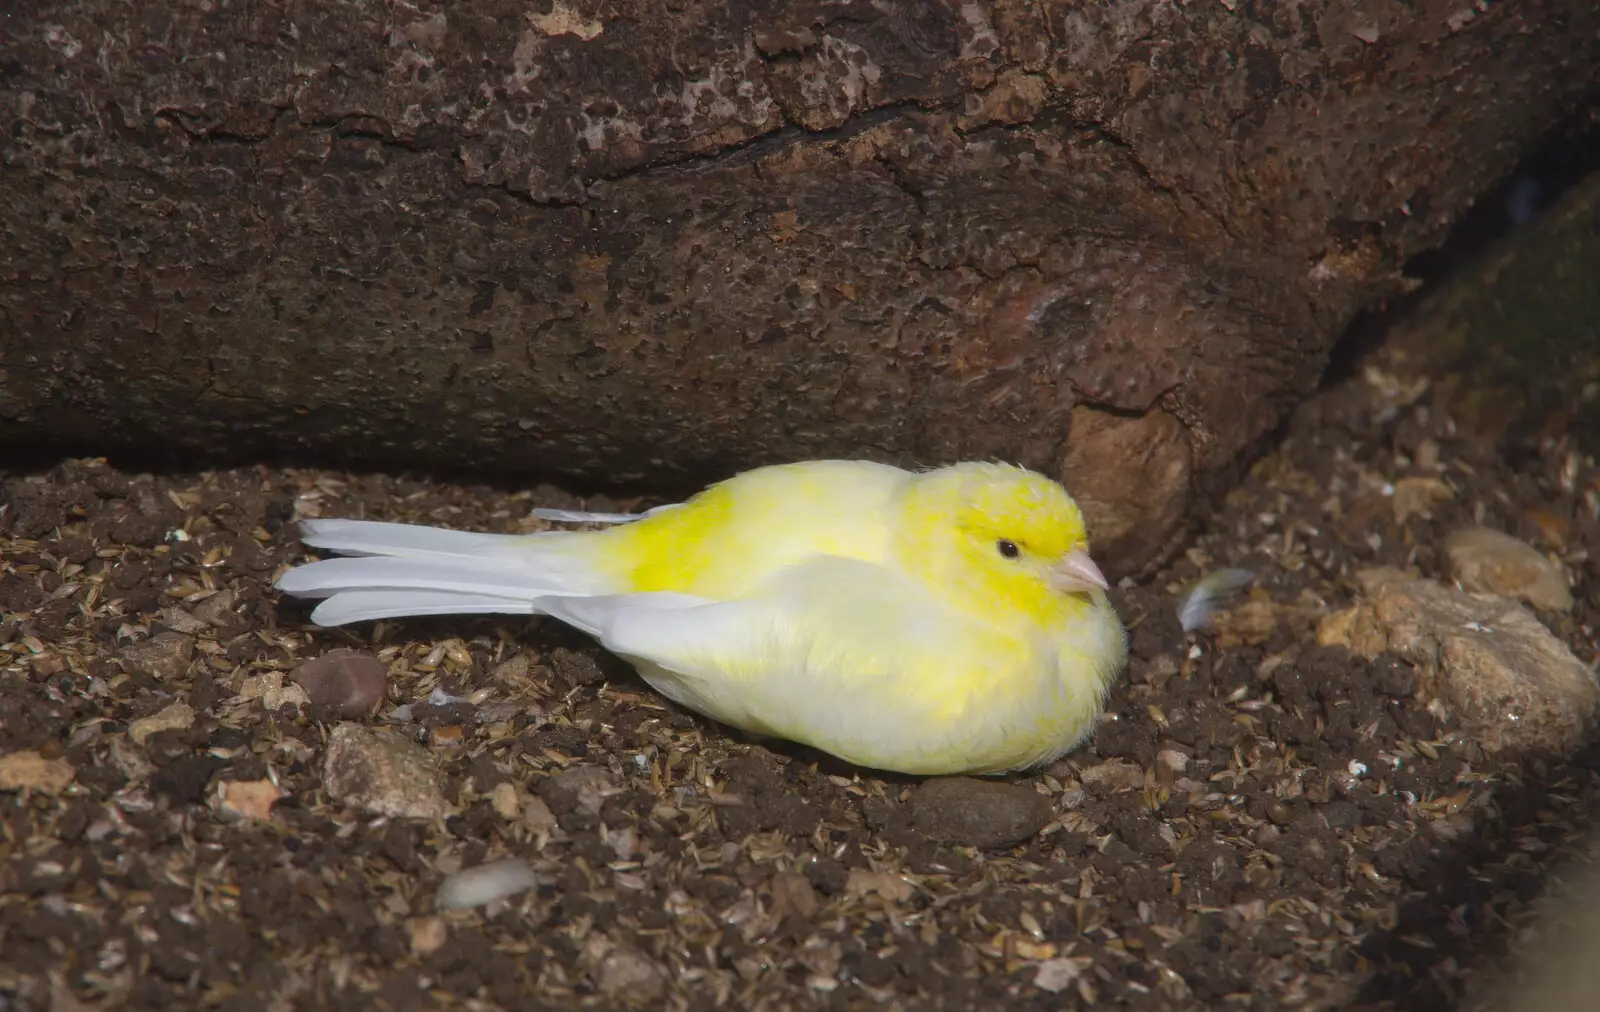 A small yellow bird in the garden aviary, from Kenilworth Castle and the 69th Entry Reunion Dinner, Stratford, Warwickshire - 14th September 2019